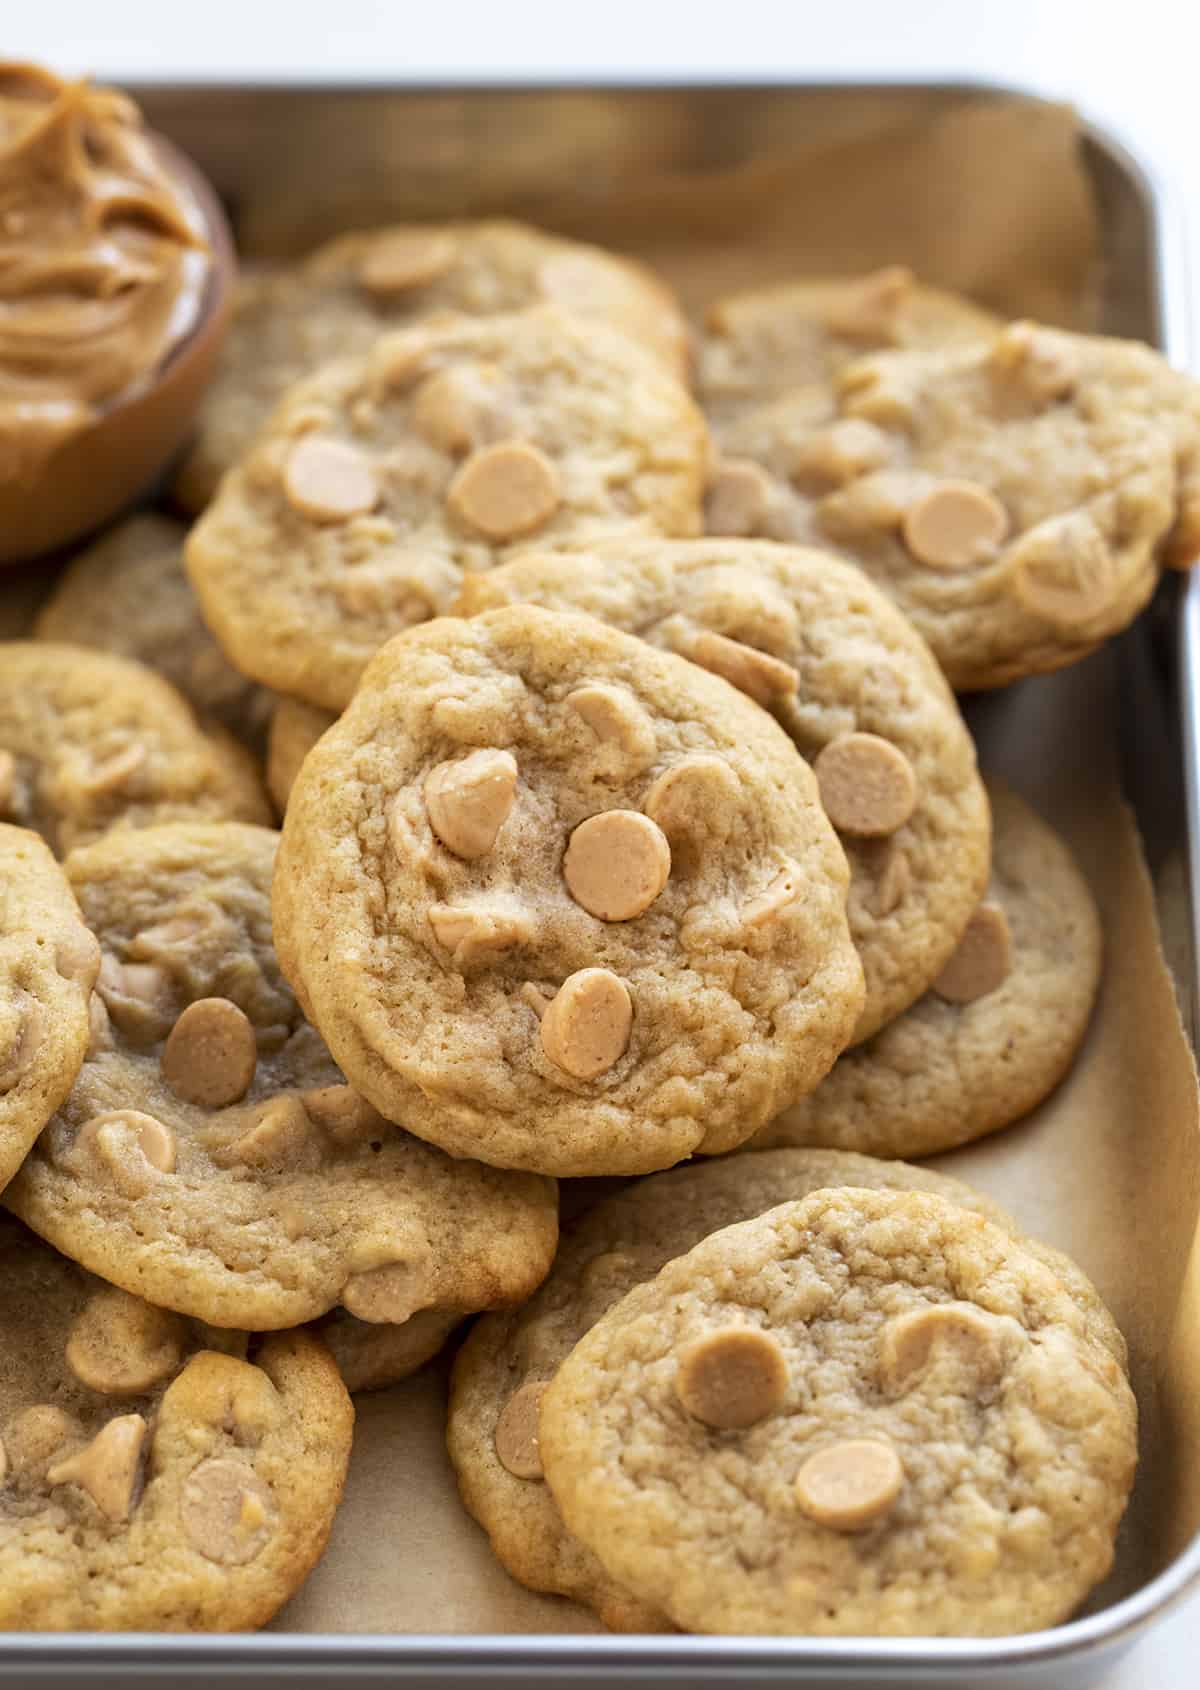 Stacks of Banana Peanut Butter Chip Cookies in Tray. Baking, Cookies, Cookie Exchange, Christmas Cookies, Banana Cookies, Peanut Butter Chip Cookies, How to Make Chewy Cookies, Soft Cookies, Elvis Cookies, Dessert, Cookie Recipes, i am baker, iambaker